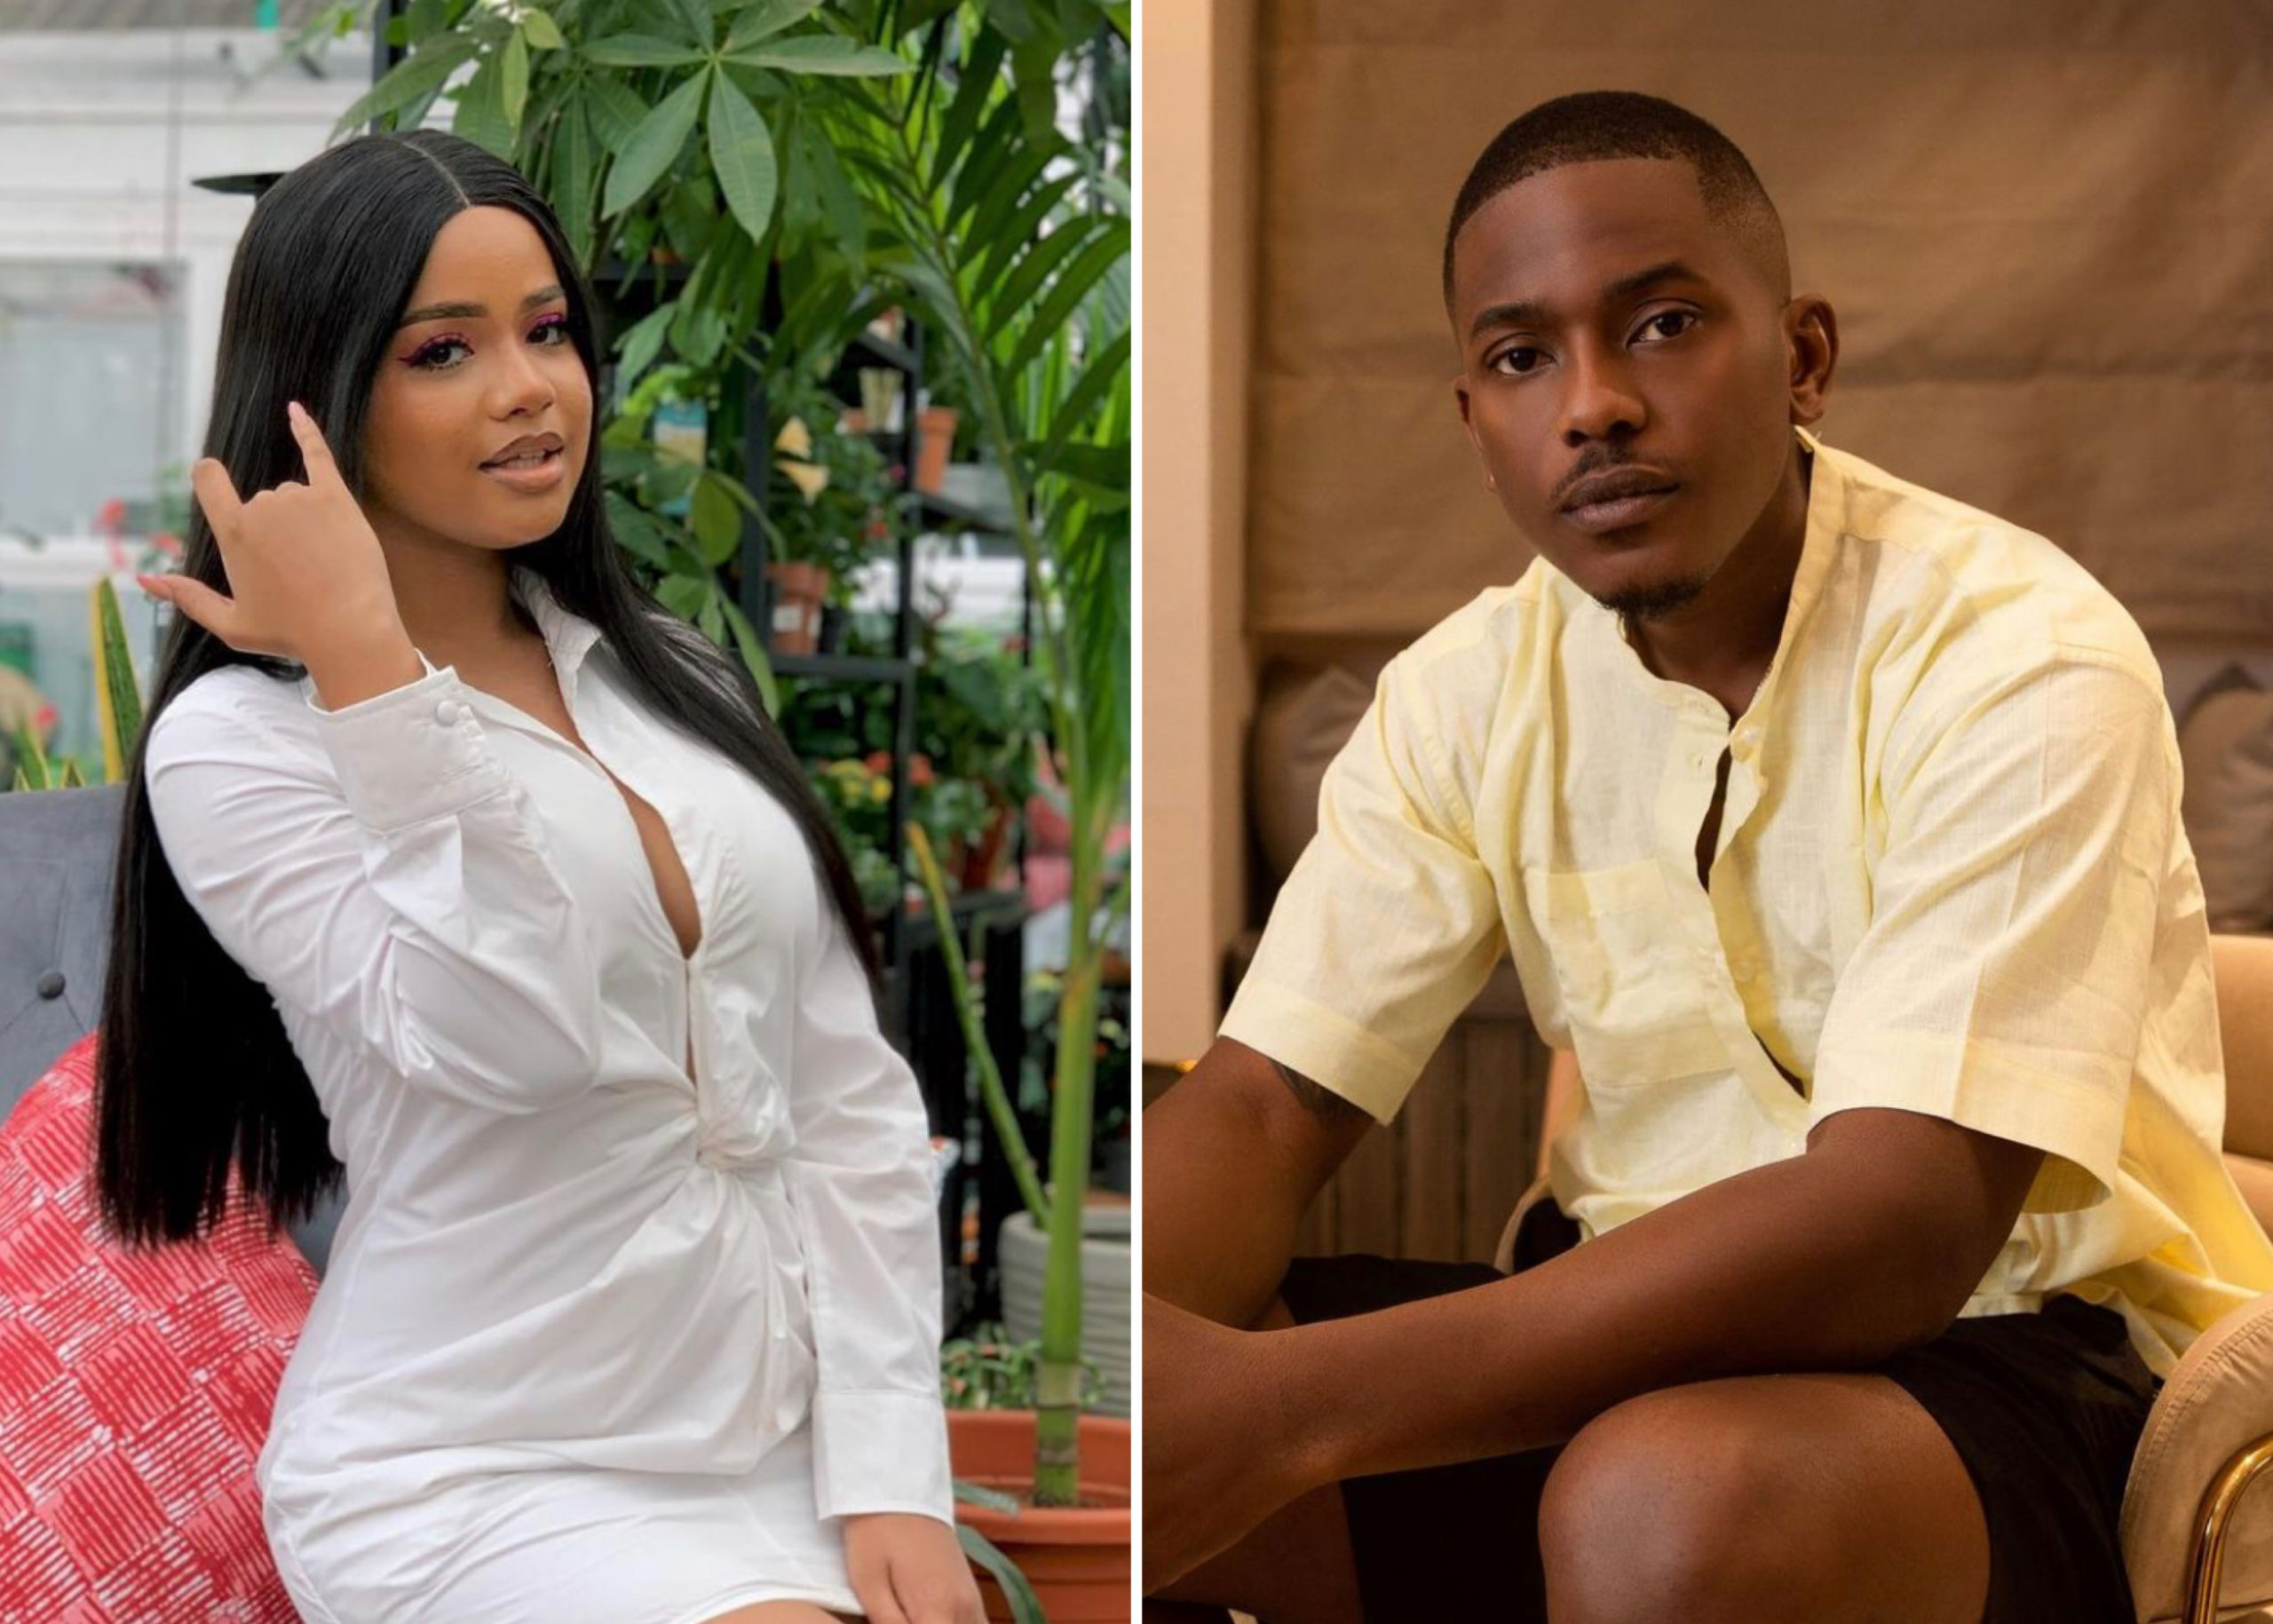 'You’re A Cradle Snatcher, Predator' - Timini Egbuson's Ex-Girlfriend Calls Him Out As She Warns Teenagers Not To Date Older Men